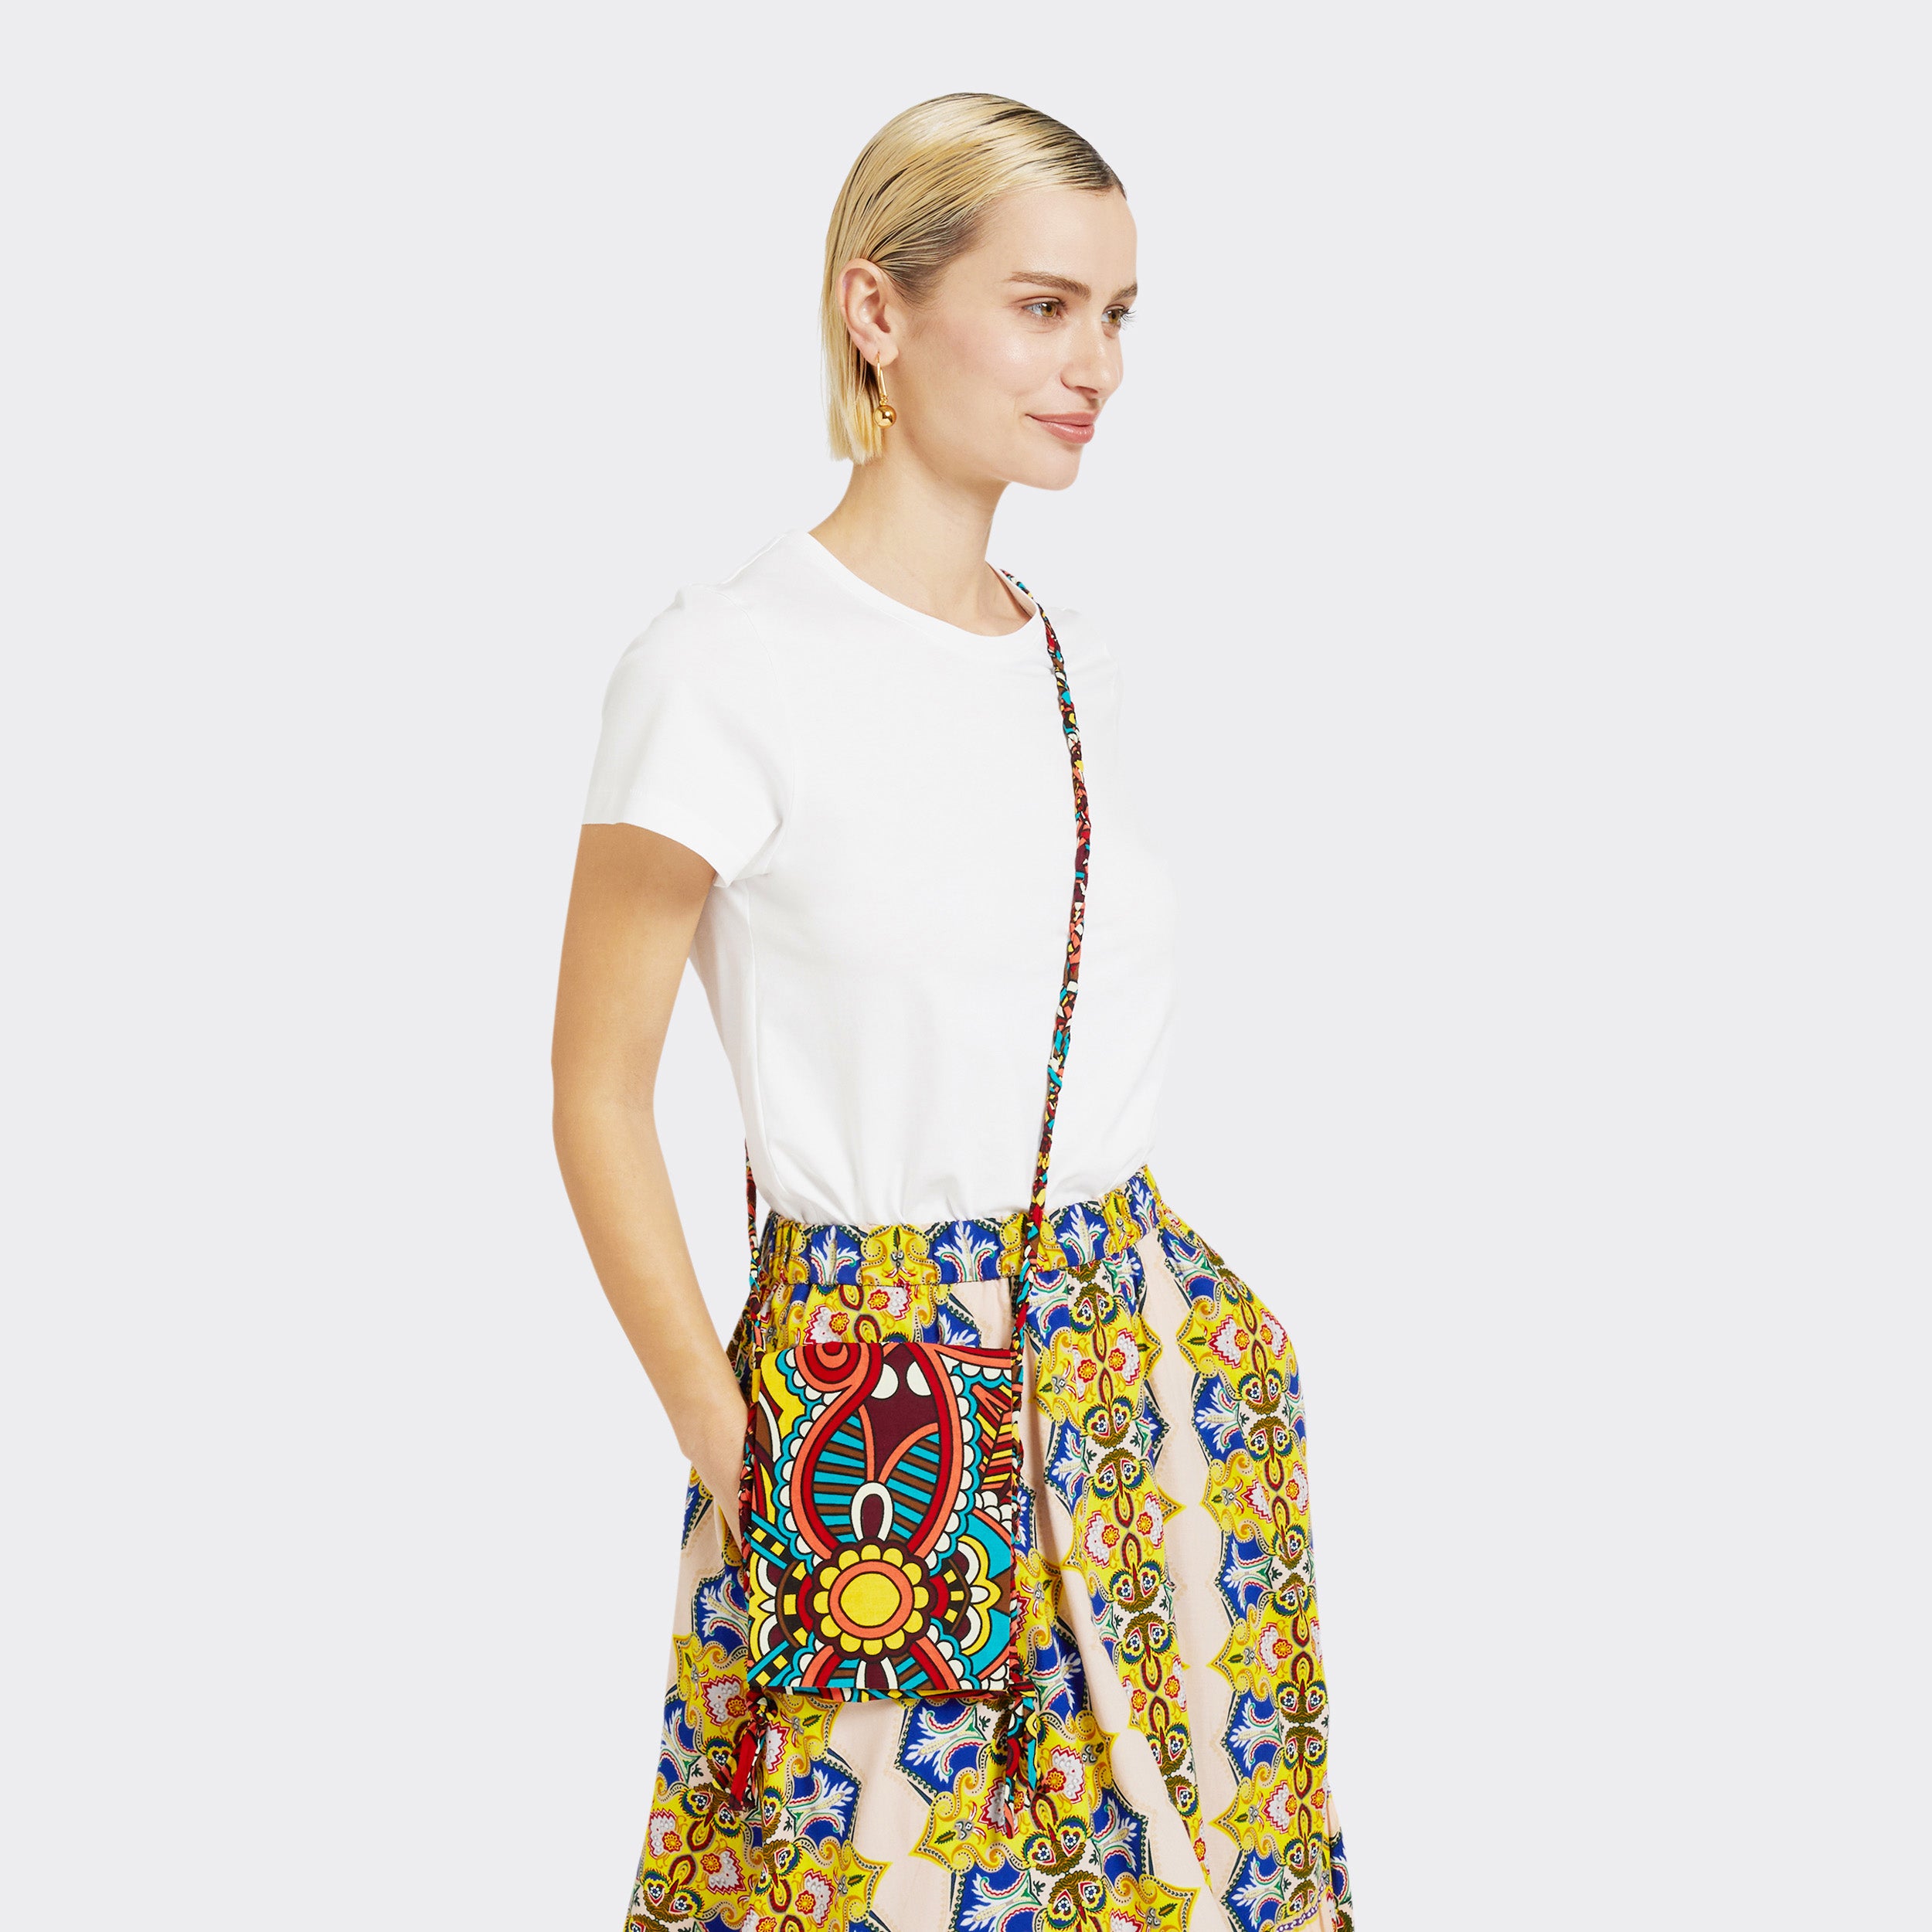 The model is wearing the Crossbody Mini Bag in Wax African Dream with colors red, blue, and yellow. She is wearing the Flounced Maxi Skirt in Wax Magic Mosaic with colors yellow and blue with a plain white tshirt.